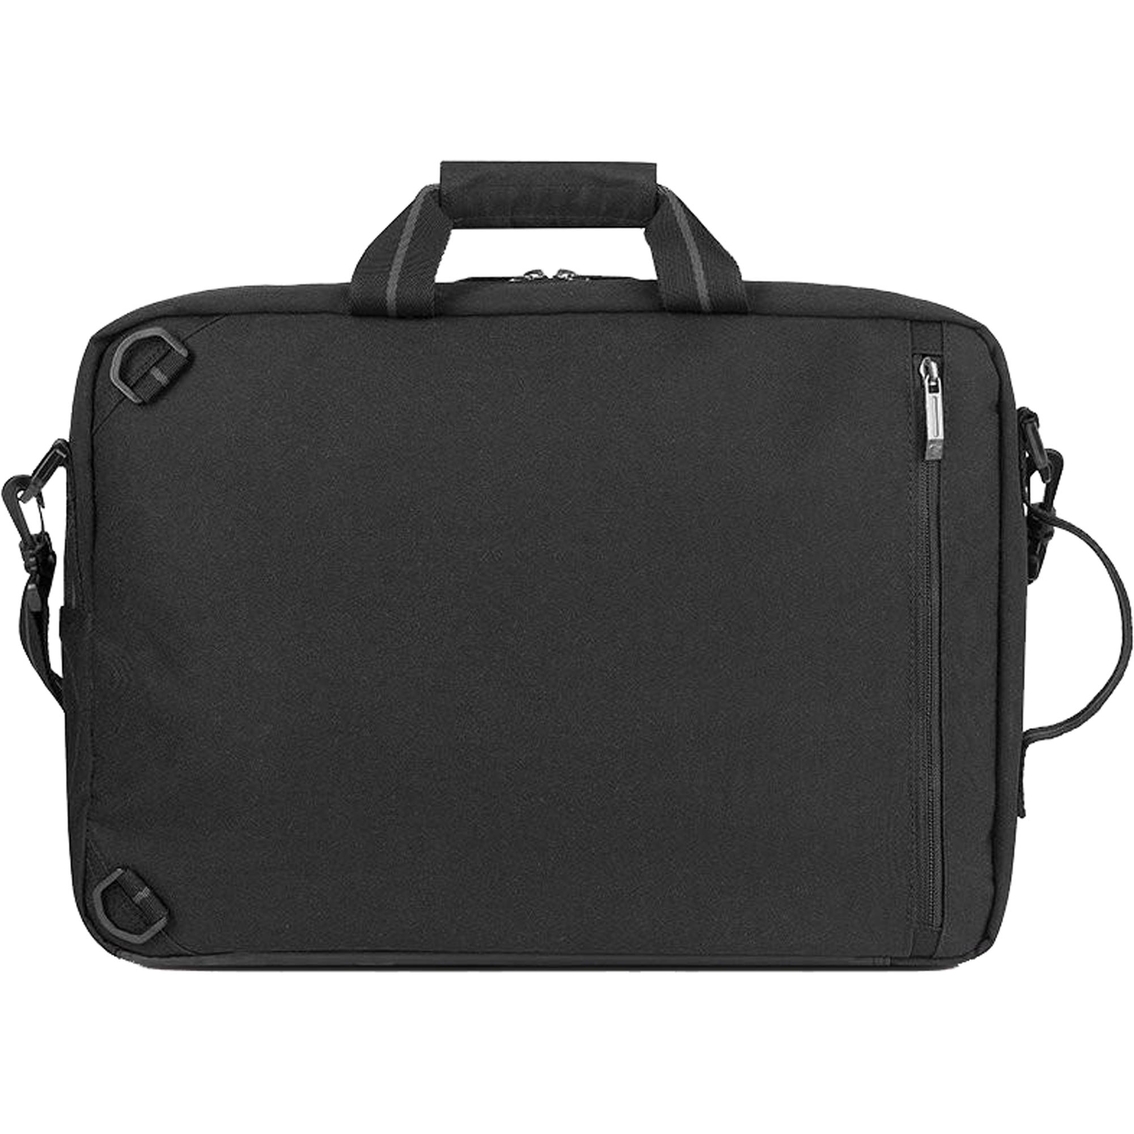 Solo Duane Hybrid 15.6 in. Briefcase - Image 3 of 6